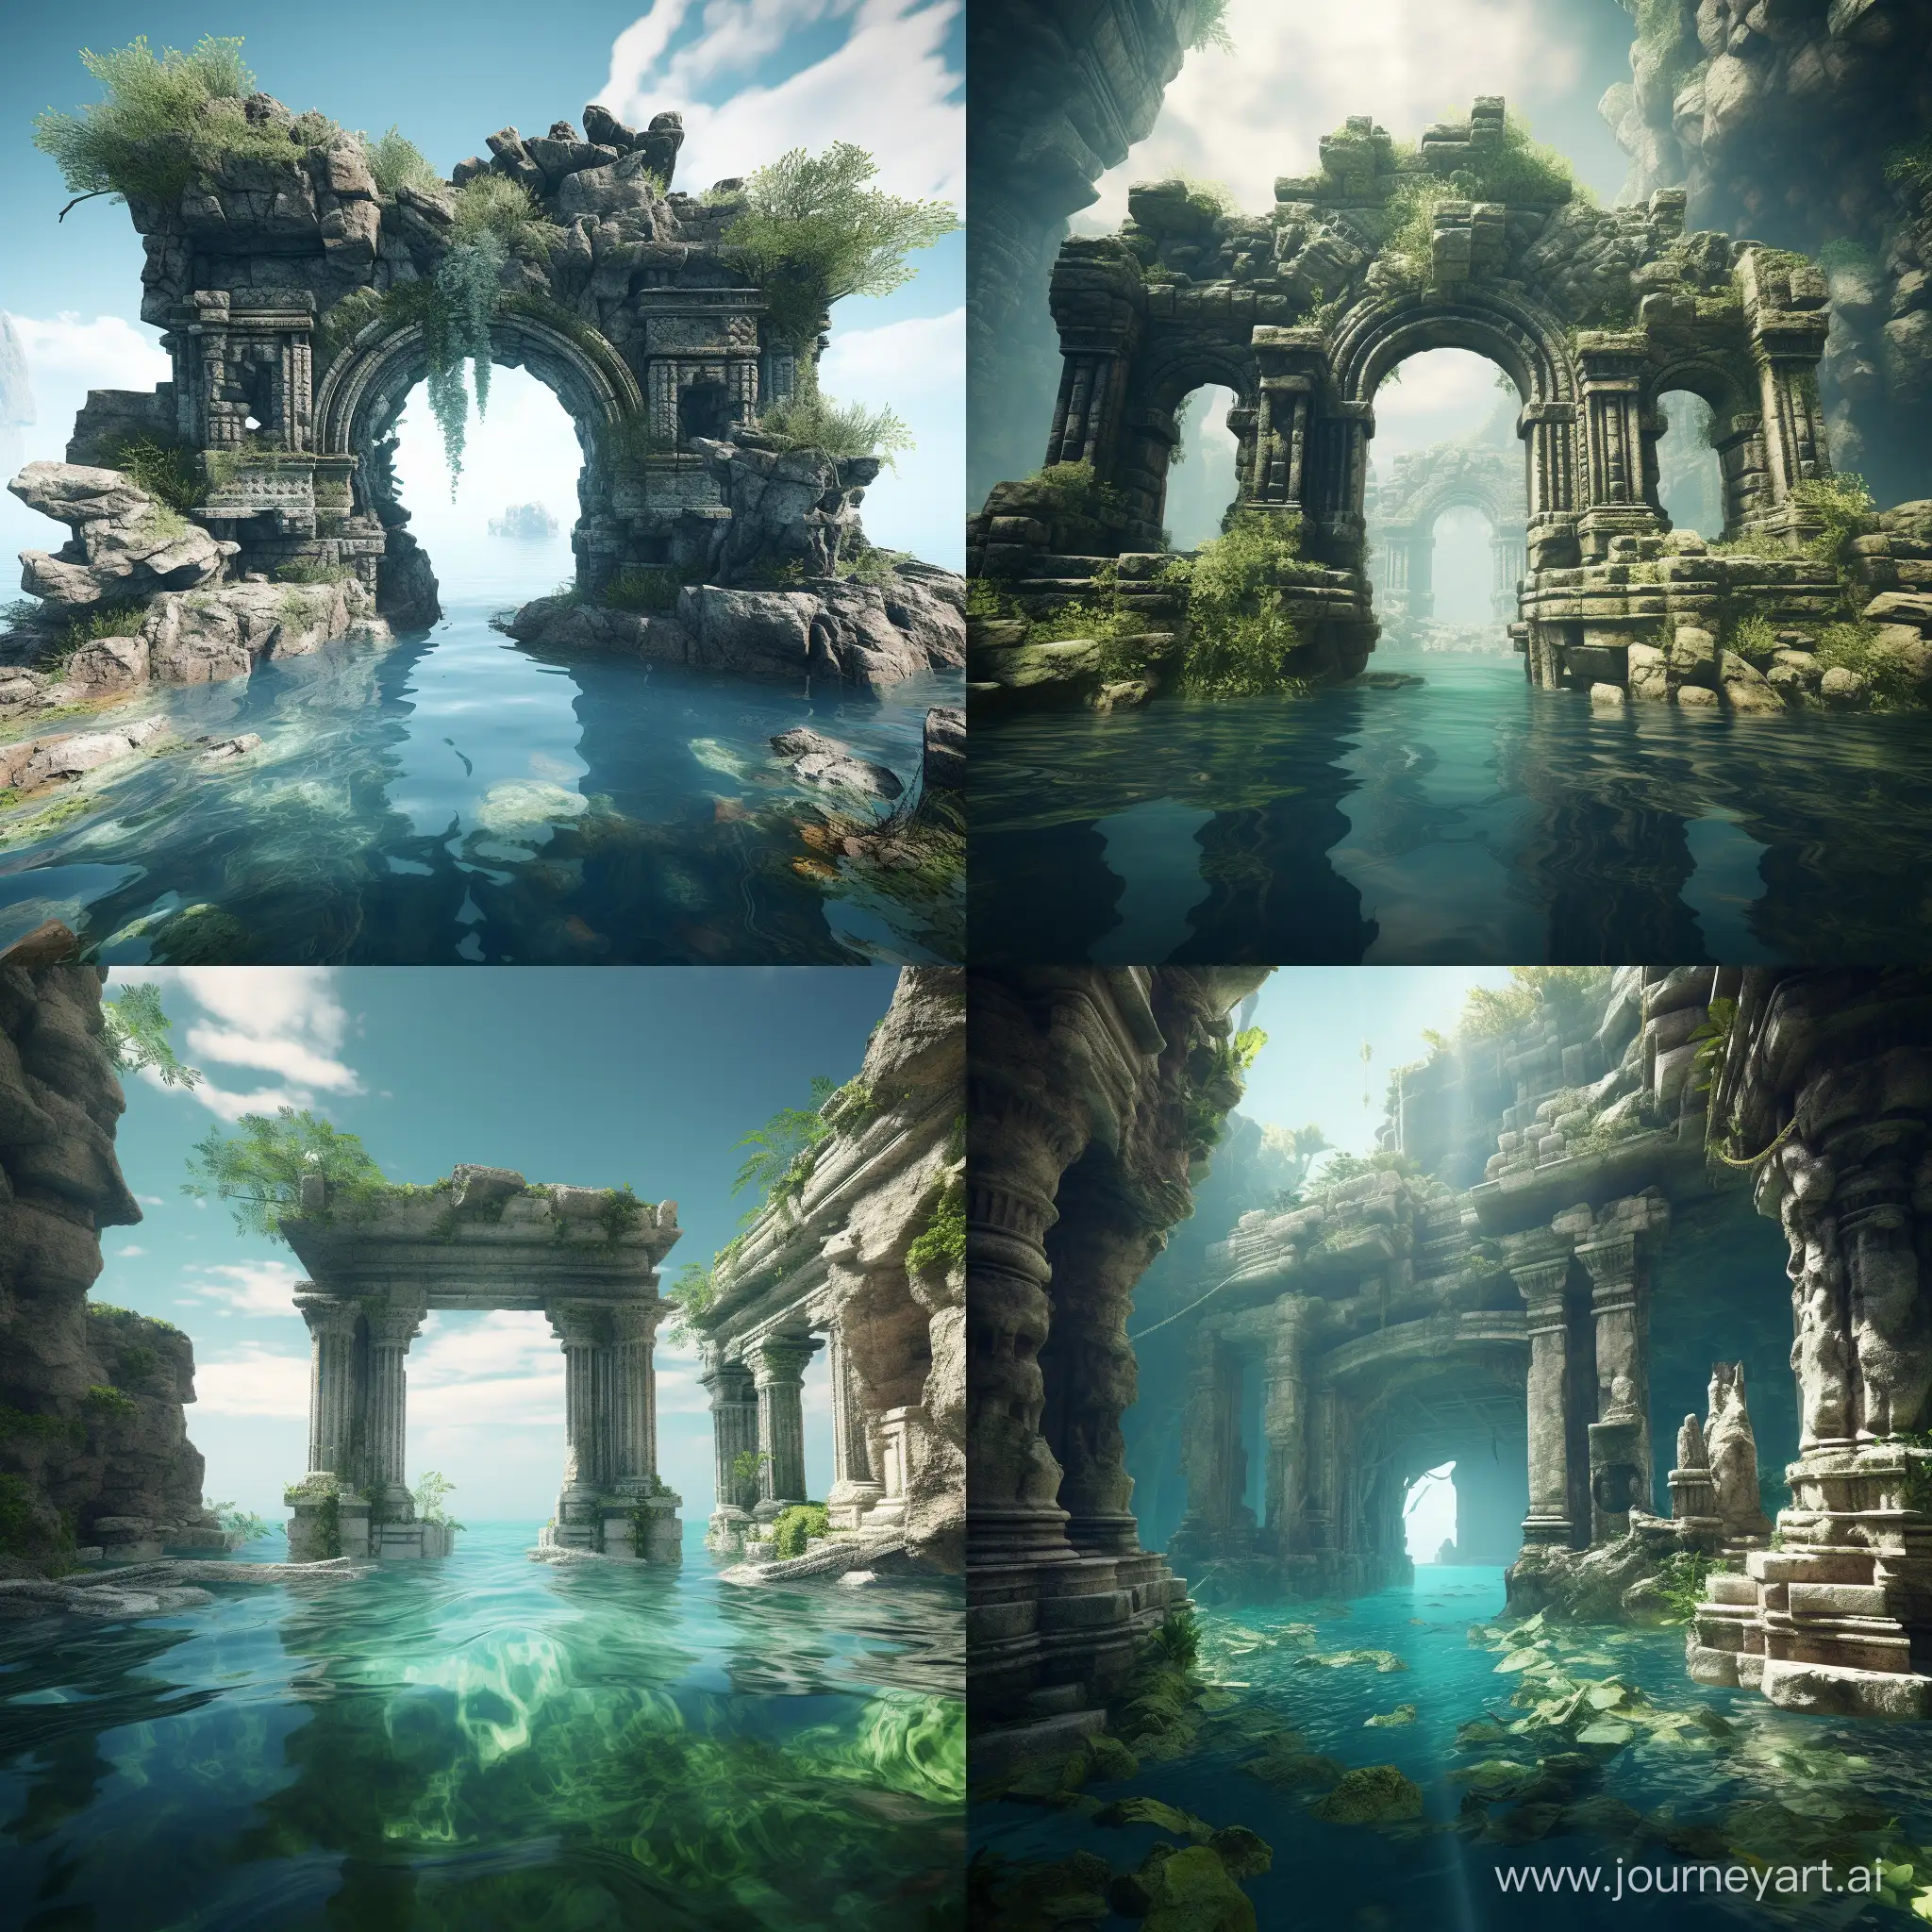 Mystical-Ancient-Temple-Ruins-Reflecting-in-Tranquil-Waters